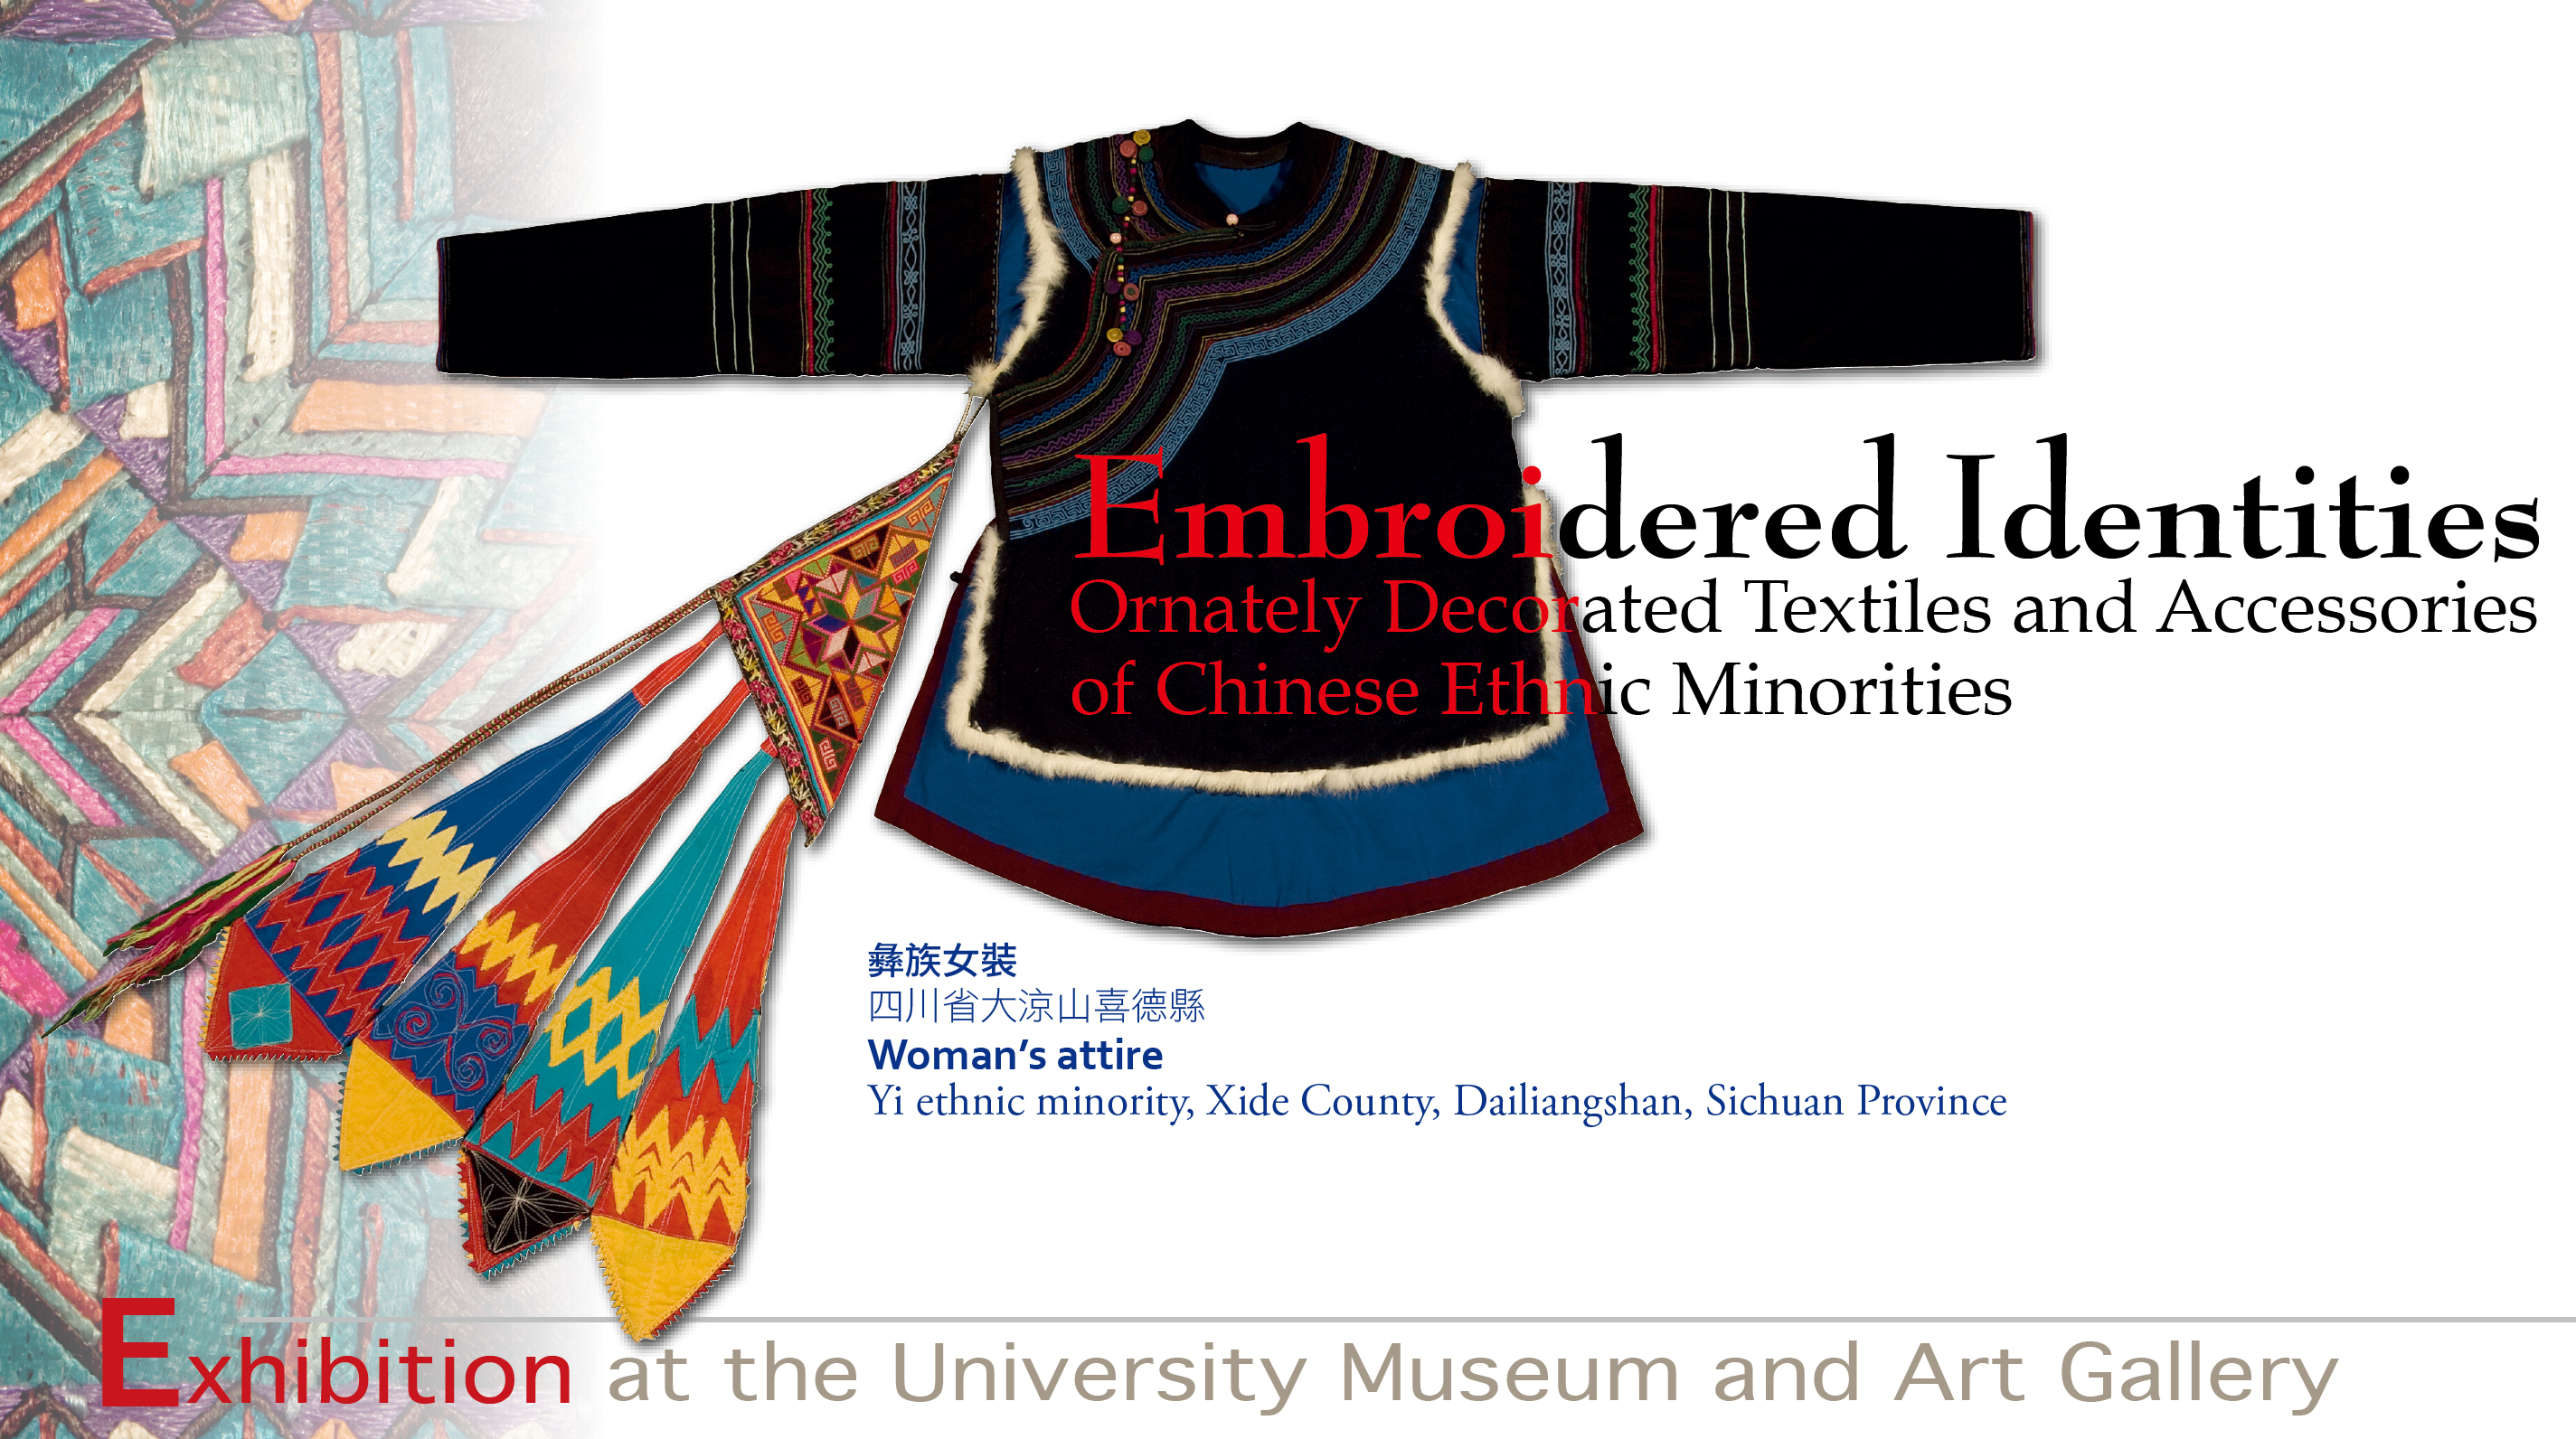 Embroidered Identities: Ornately Decorated Textiles and Accessories of Chinese Ethnic Minorities